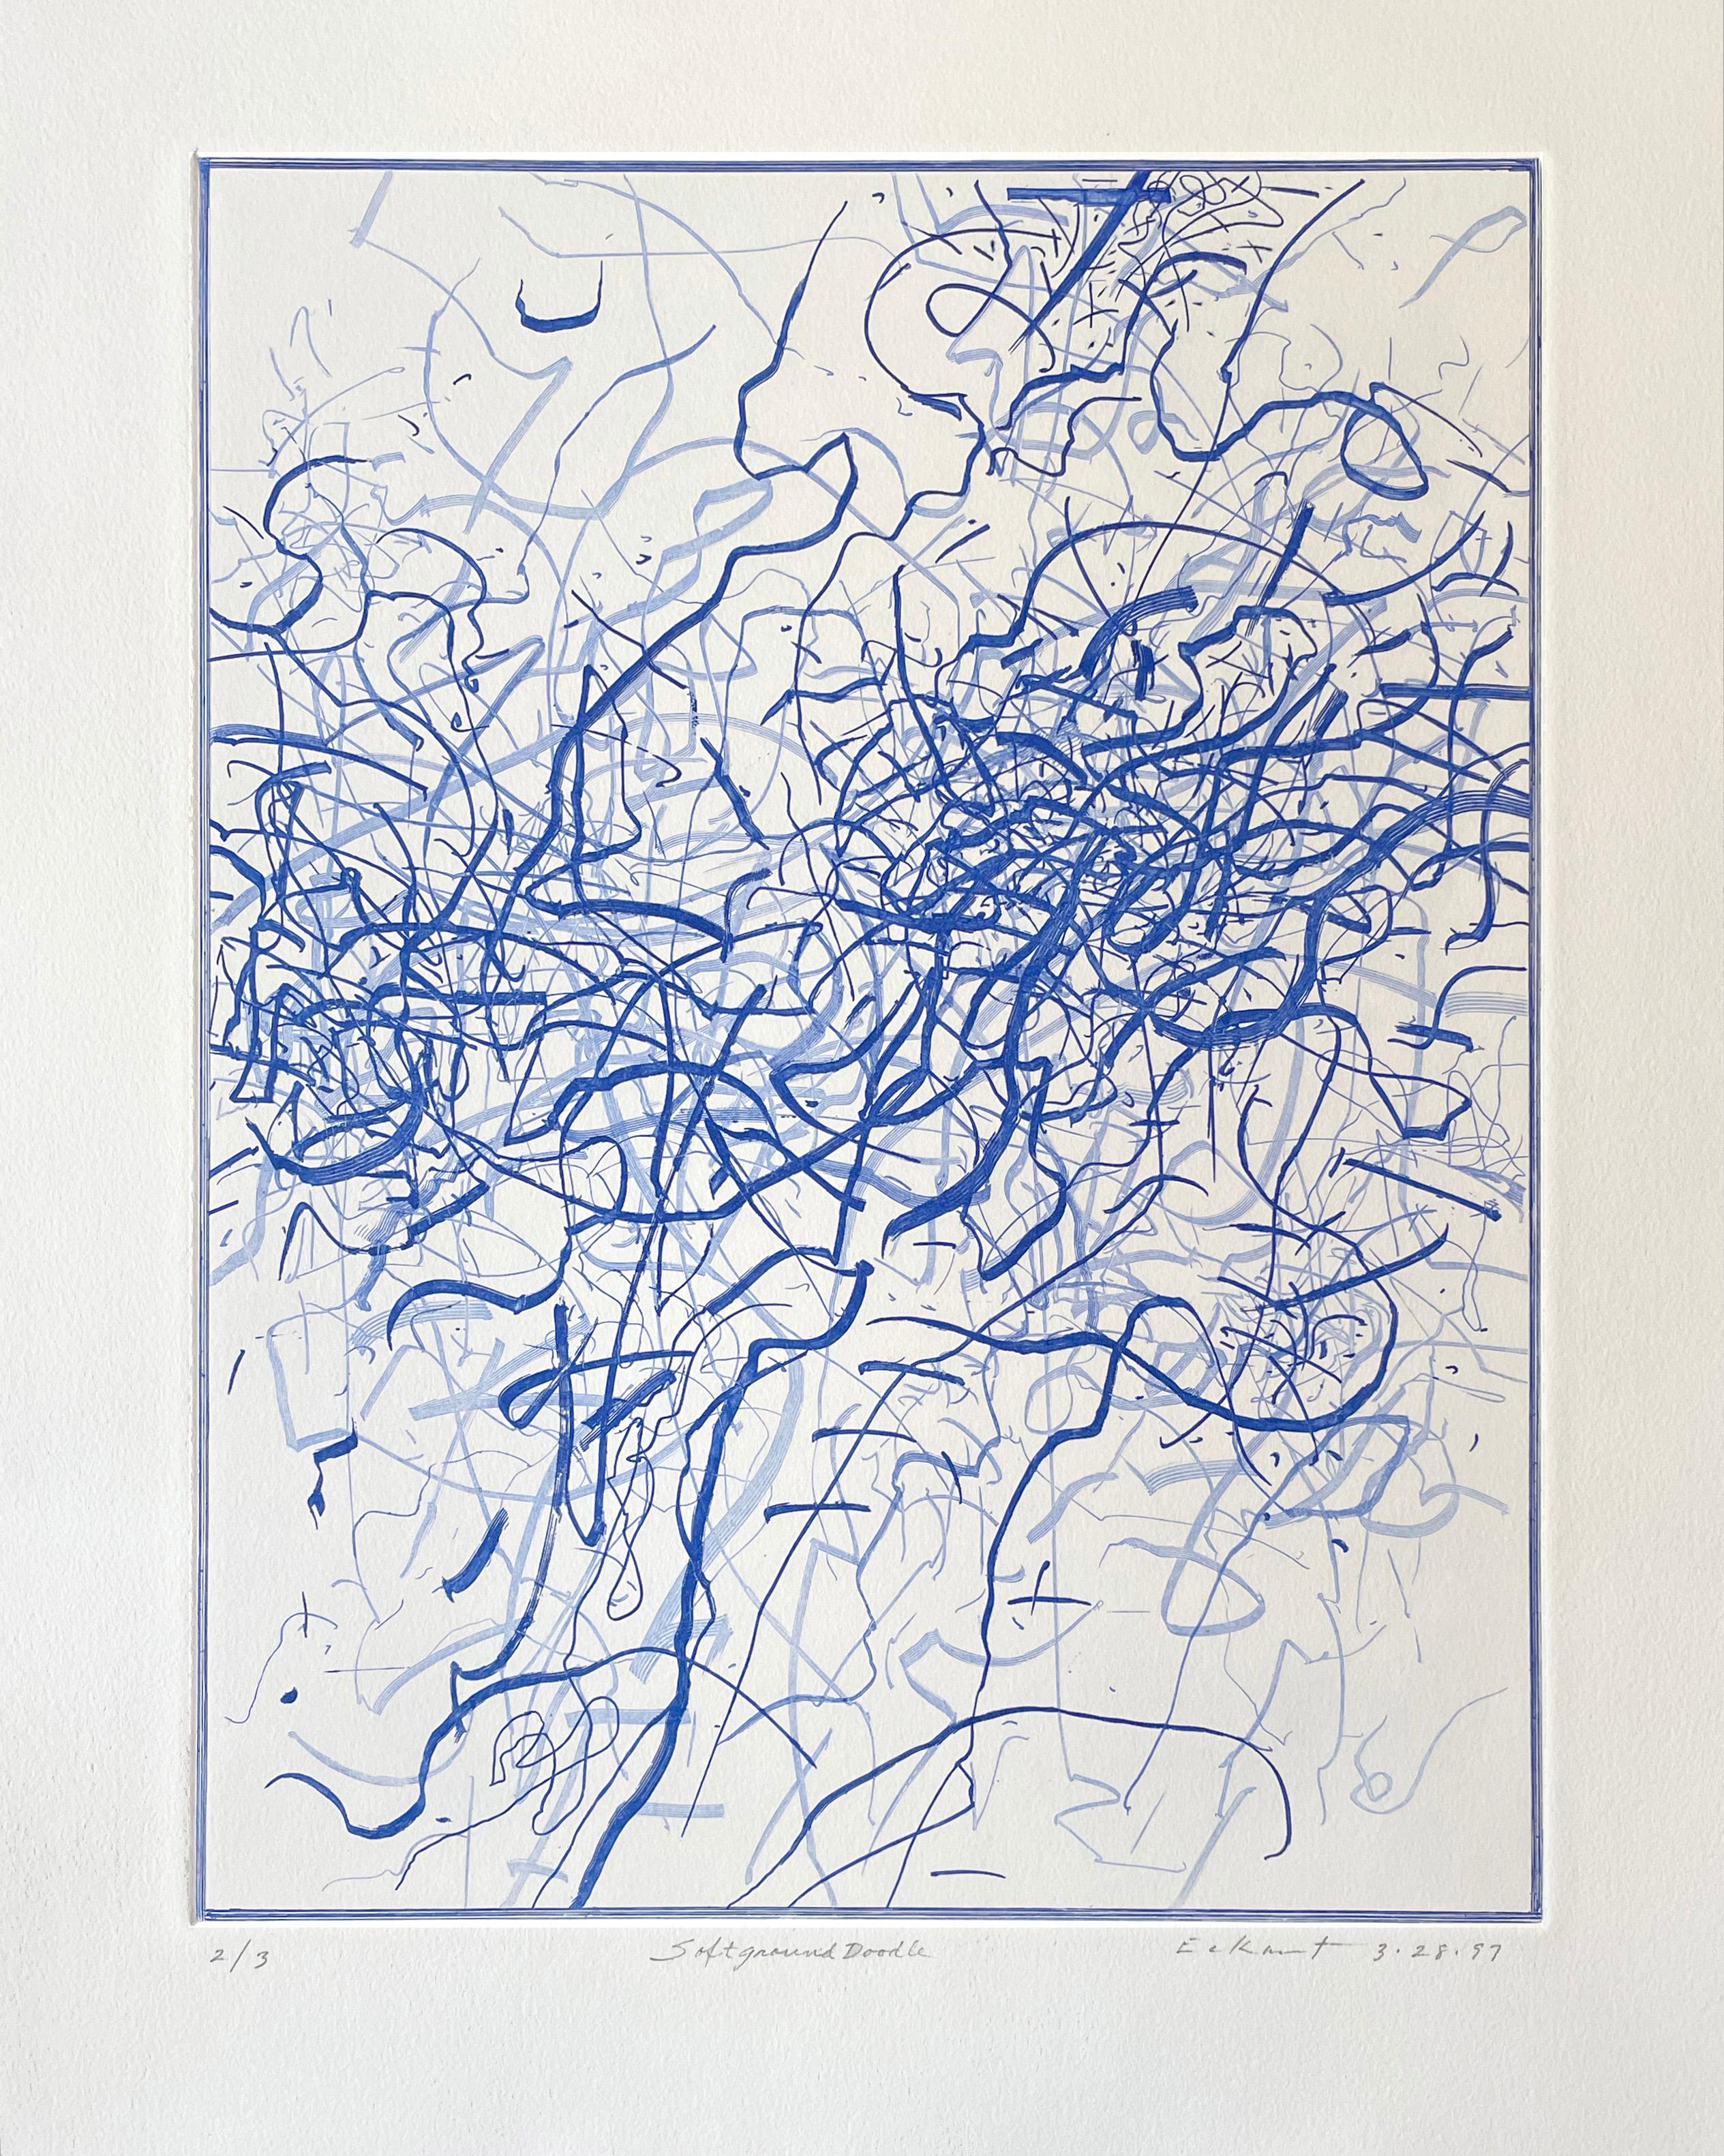 Soft Ground Doodle - Print by Charles Eckart